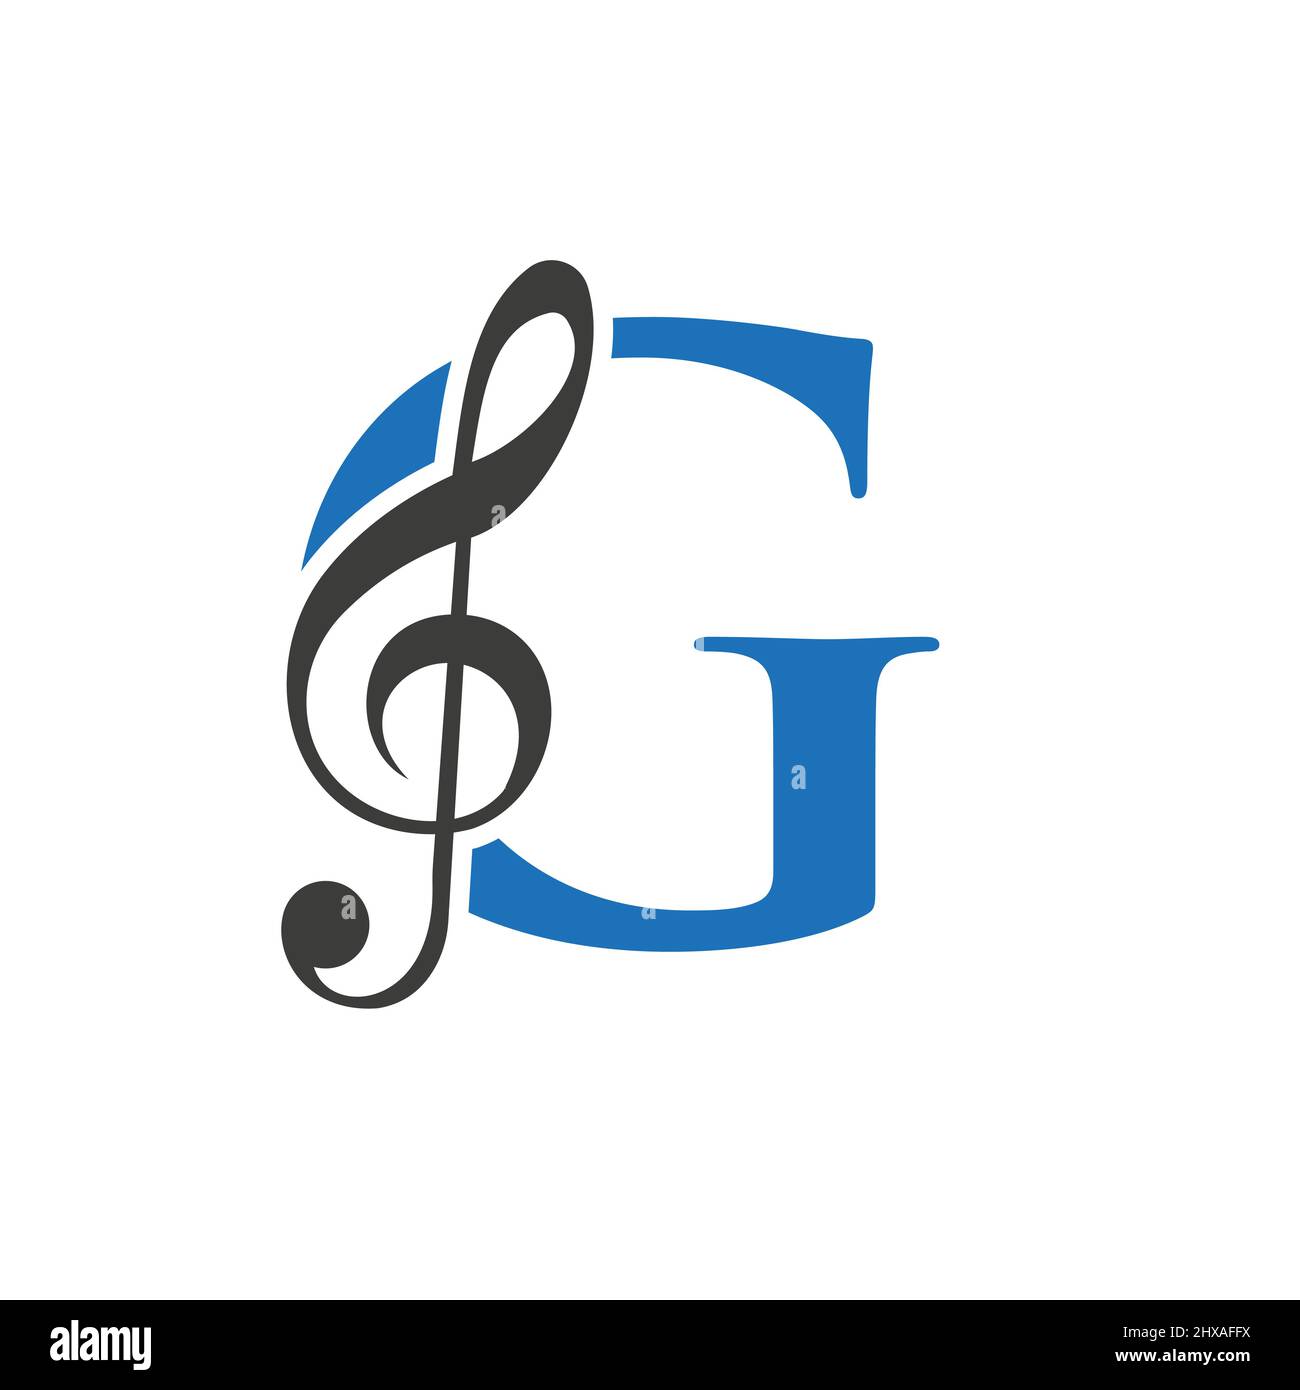 Music Logo On Letter G Concept. G Music Note Sign, Sound Music Melody Template Stock Vector